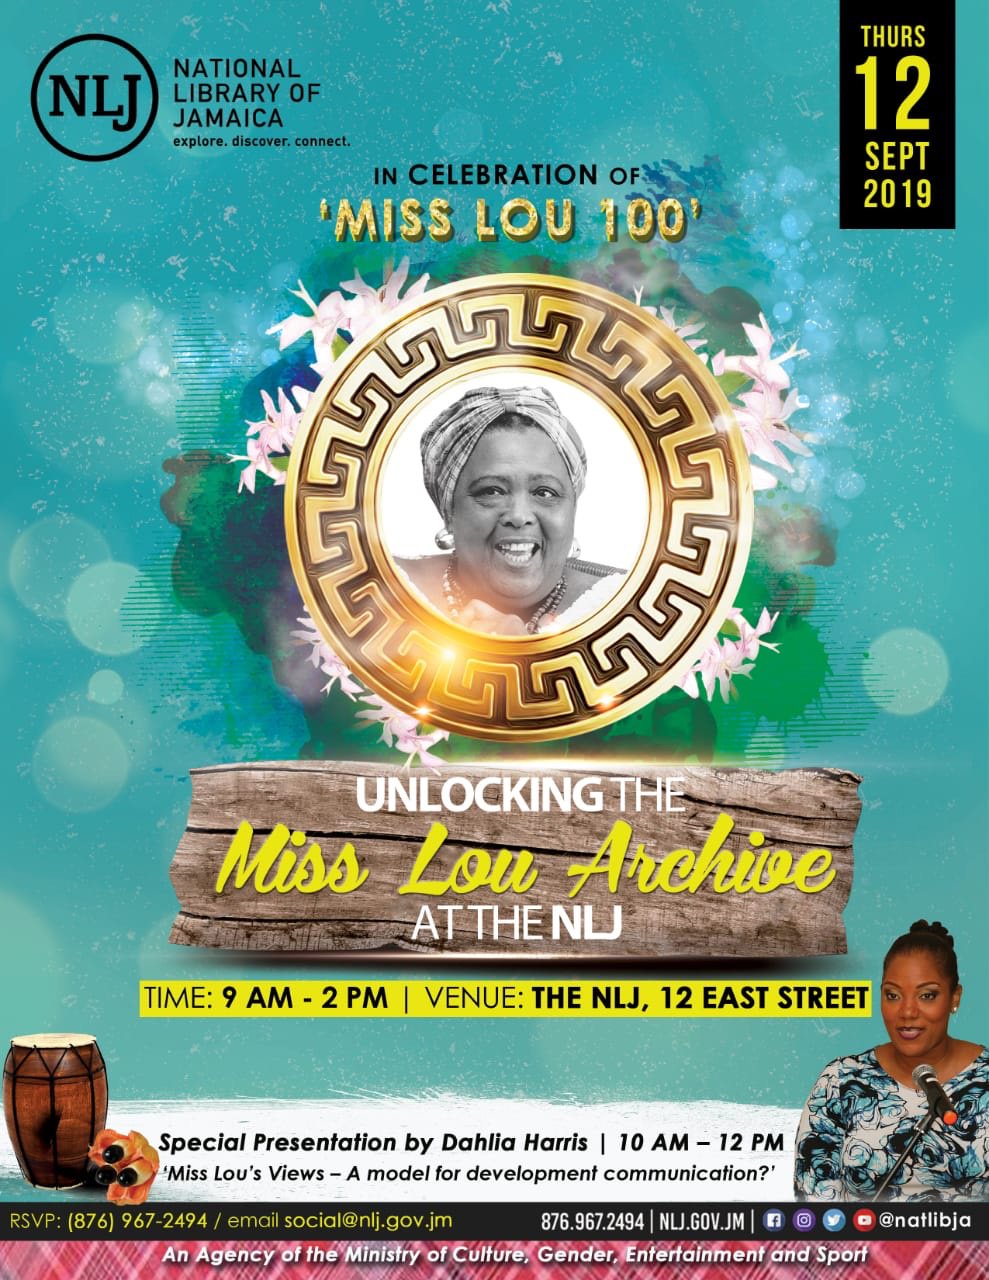 Miss Lou 100 - The National Library of Jamaica